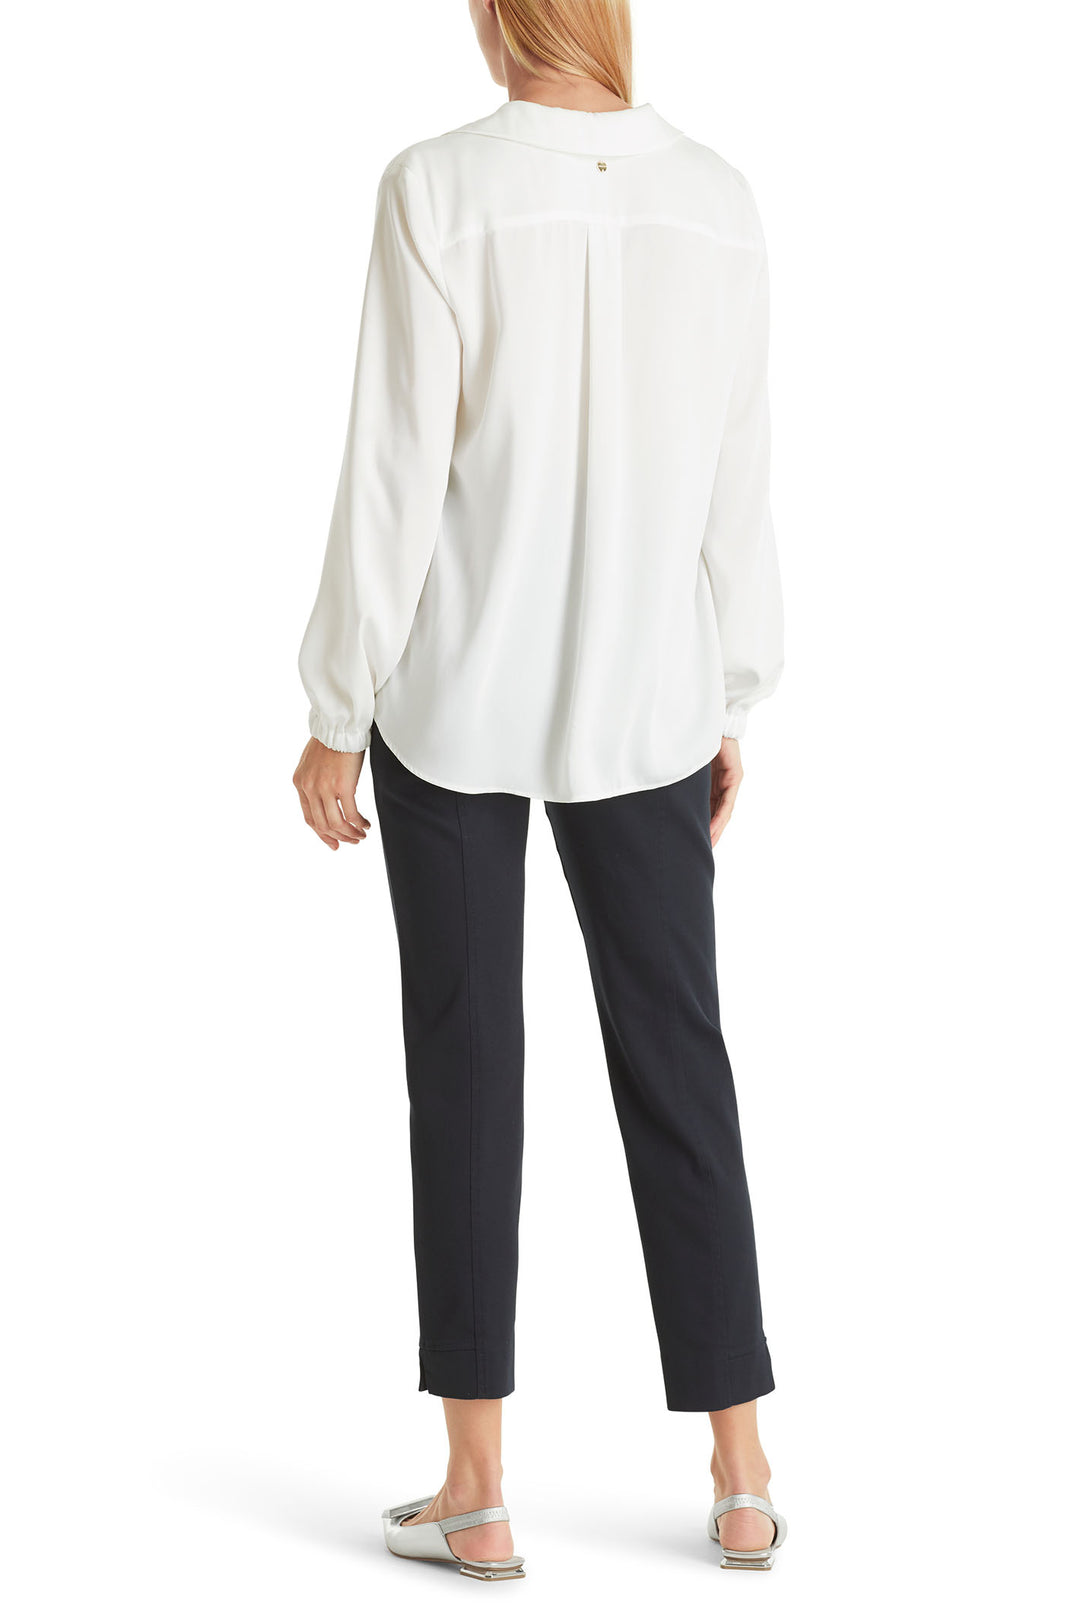 Marc Cain Collection WC 51.09 W08 110 Off White Blouse - Olivia Grace Fashion